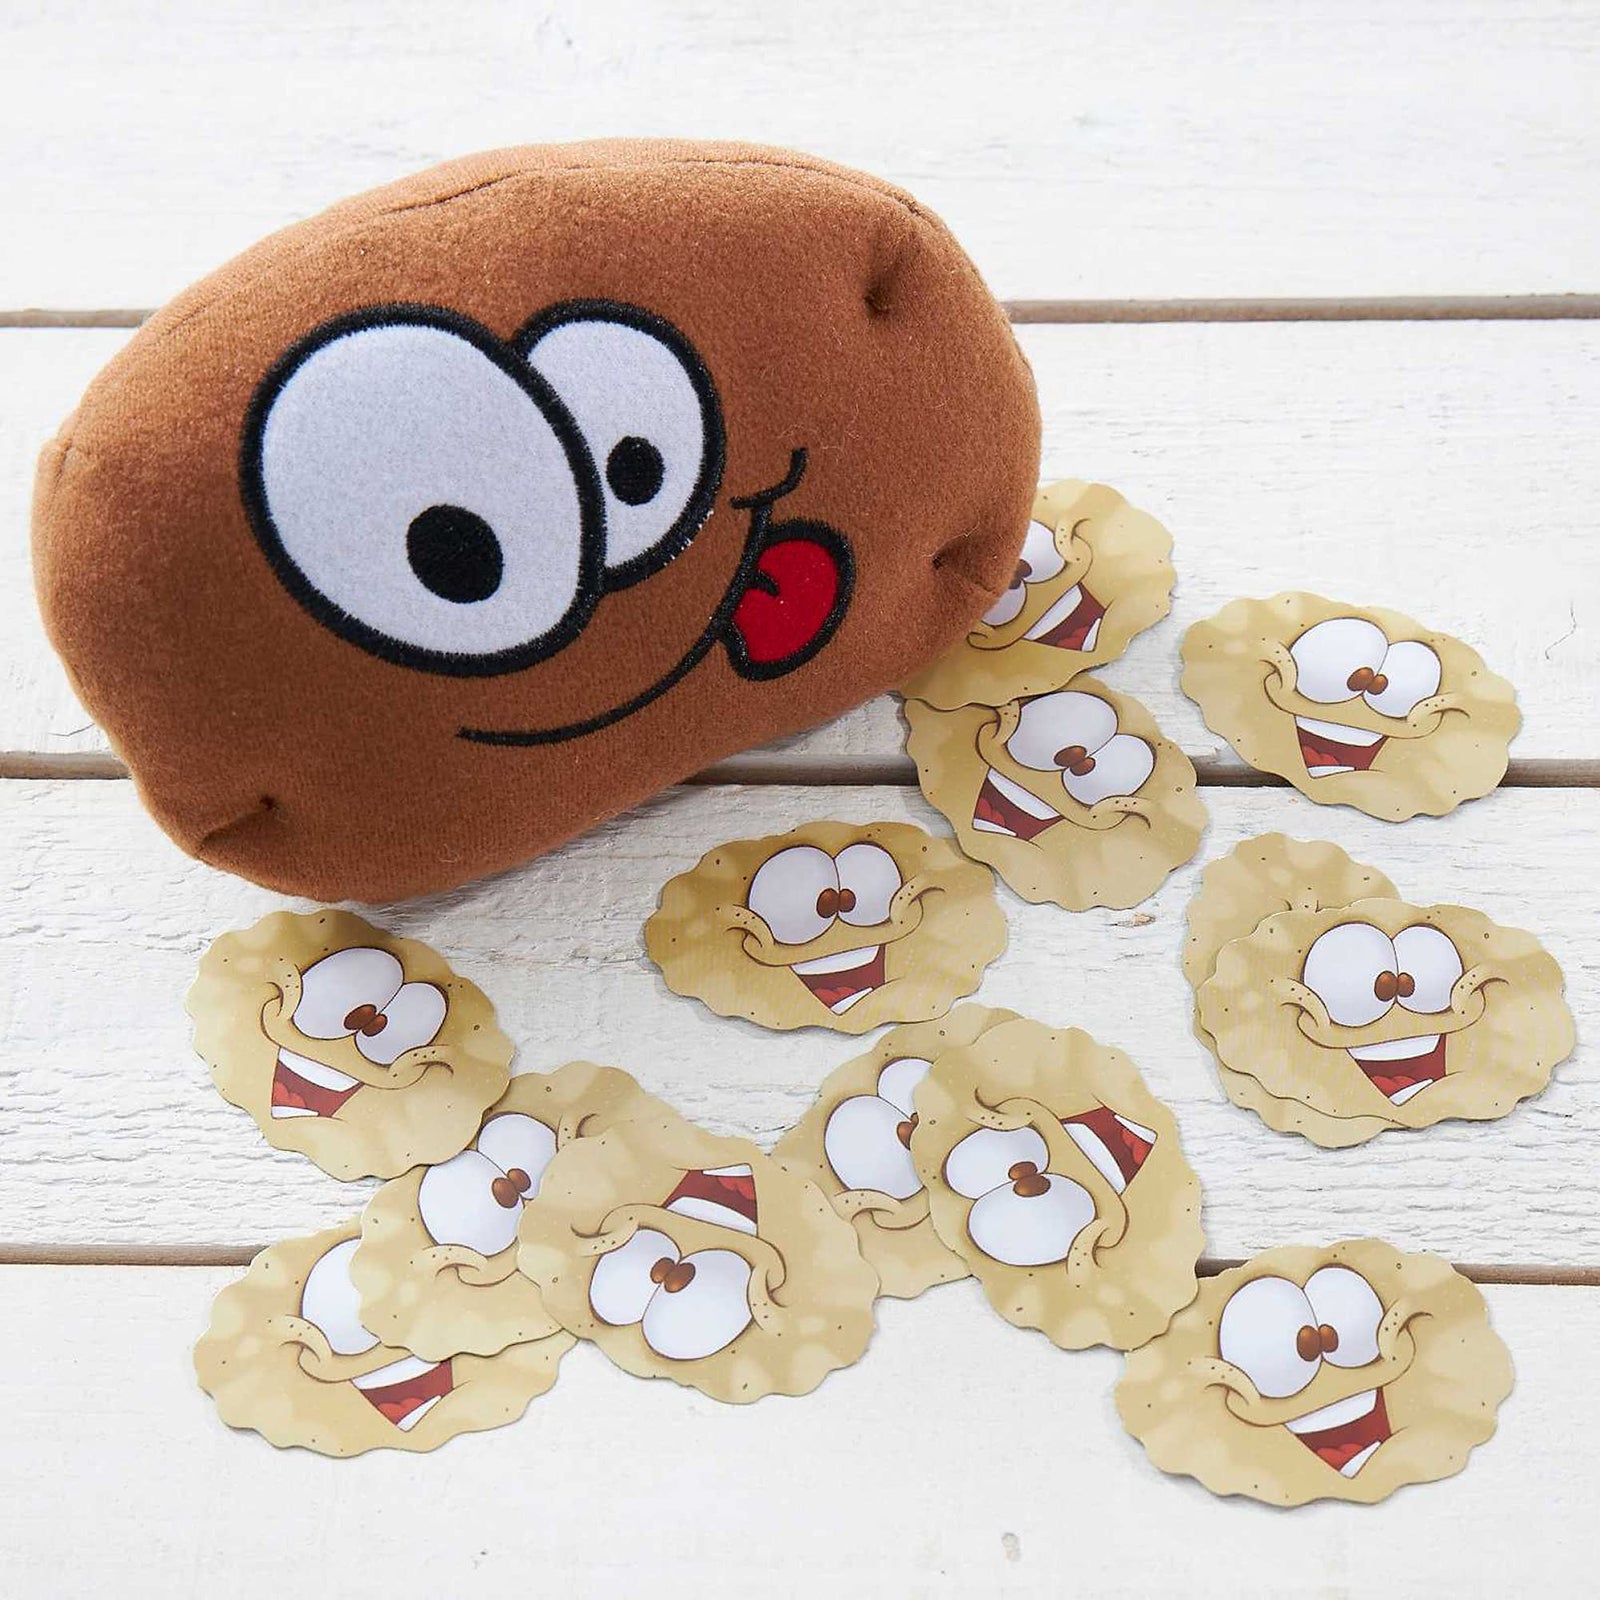 Ideal Hot Potato Electronic Musical Passing Kids Party Game, Don’t Get Caught With the Spud When the Music Stops! Ages 4+, 2-6 Players